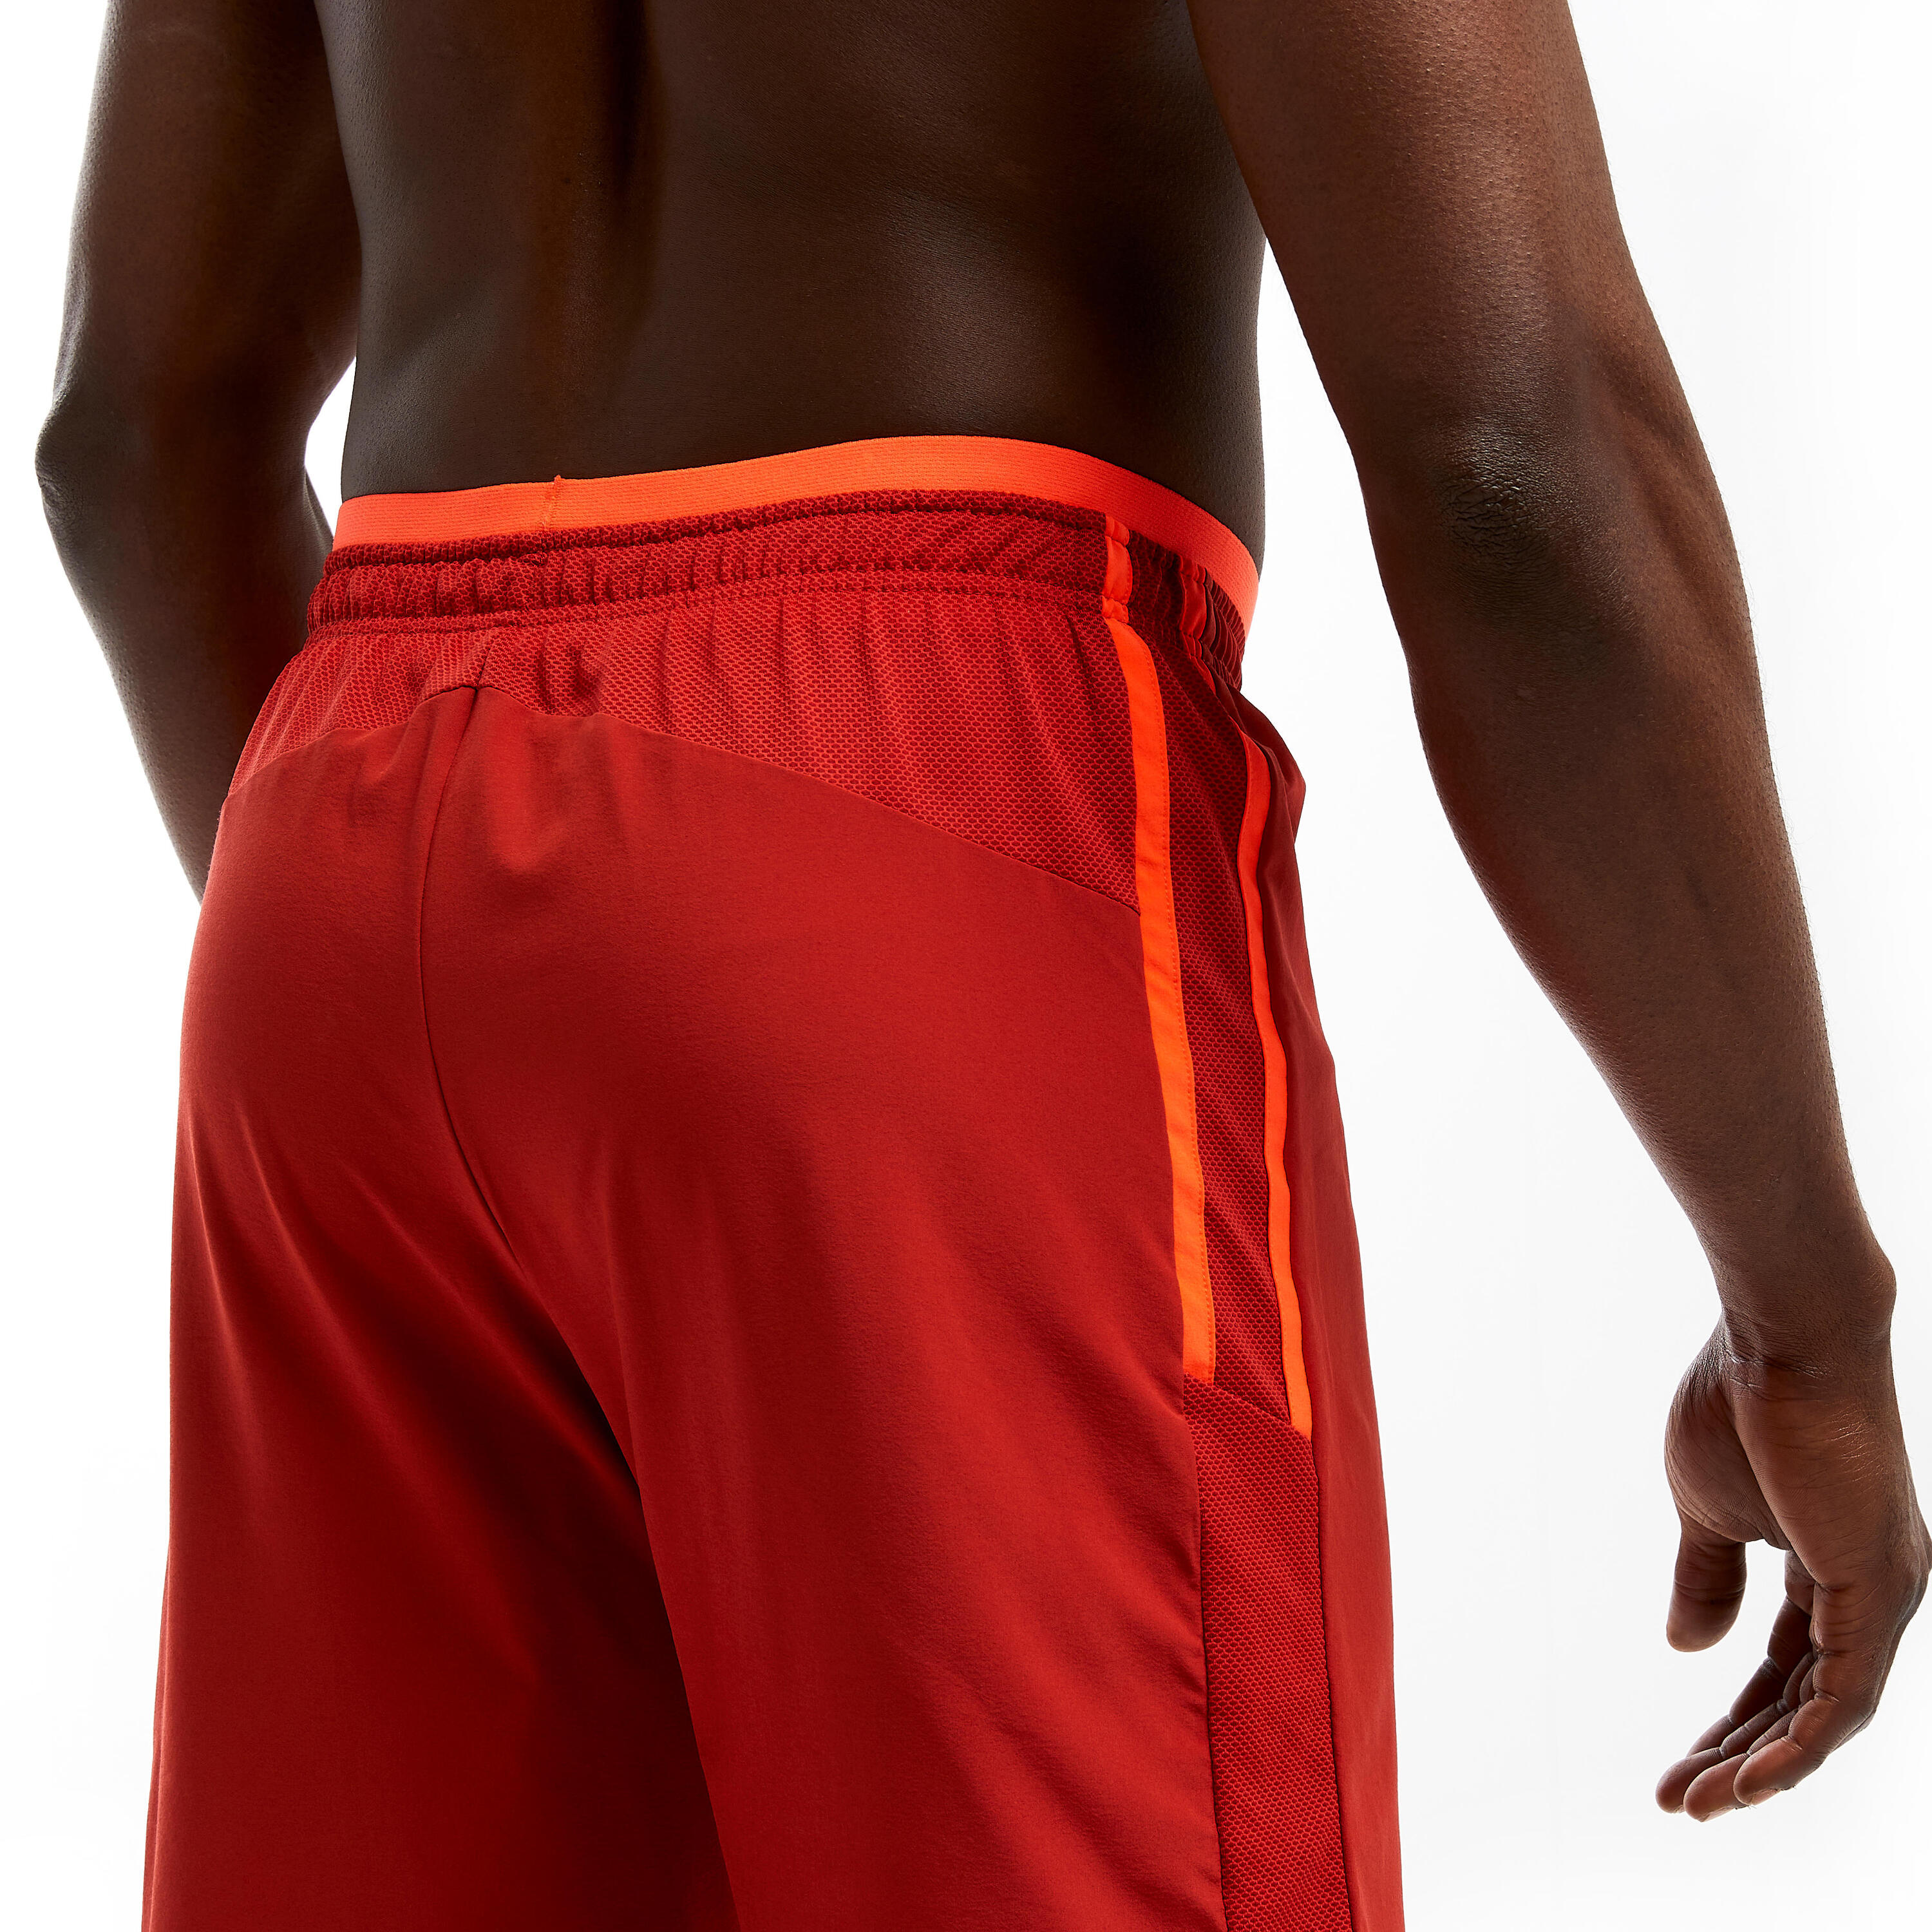 Adult 3-in-1 Football Shorts Traxium - Red 7/8